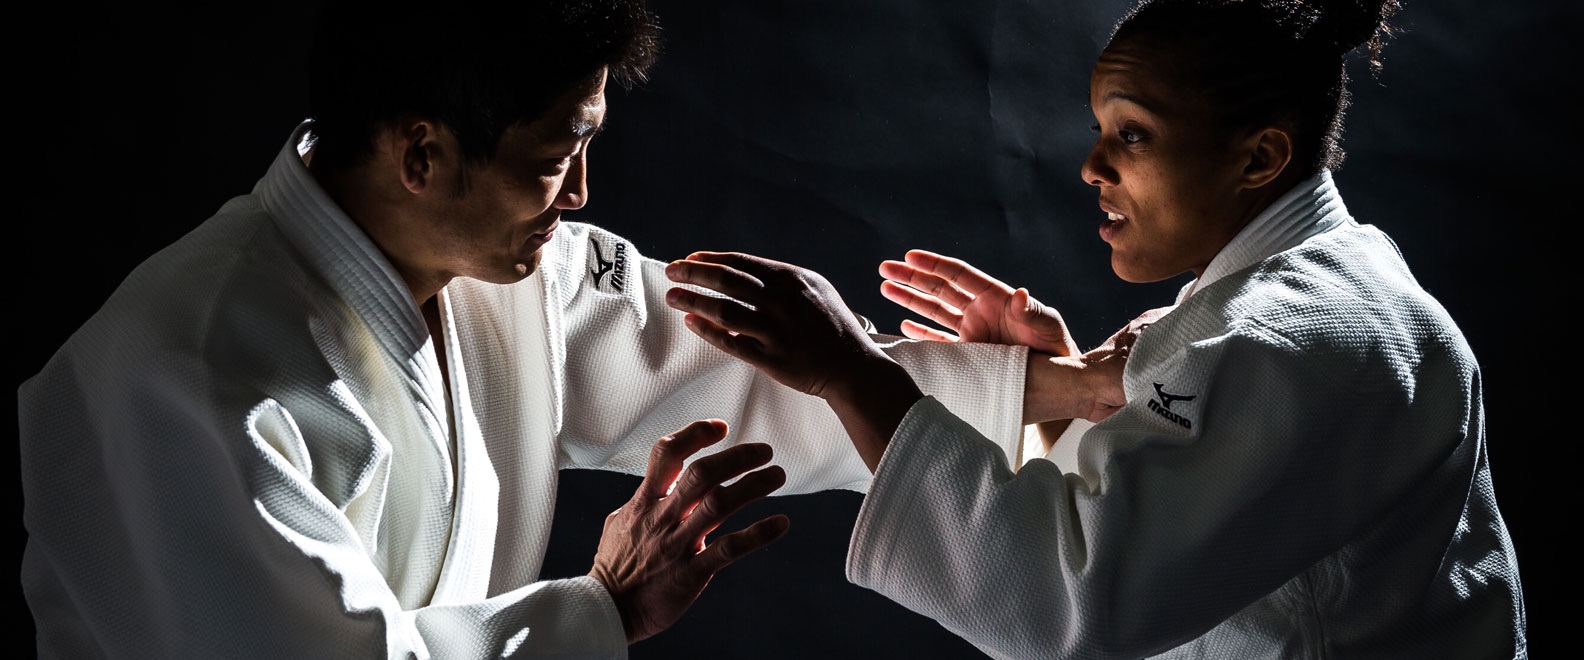 Benefits of Judo as a Sport and for Self-Defense